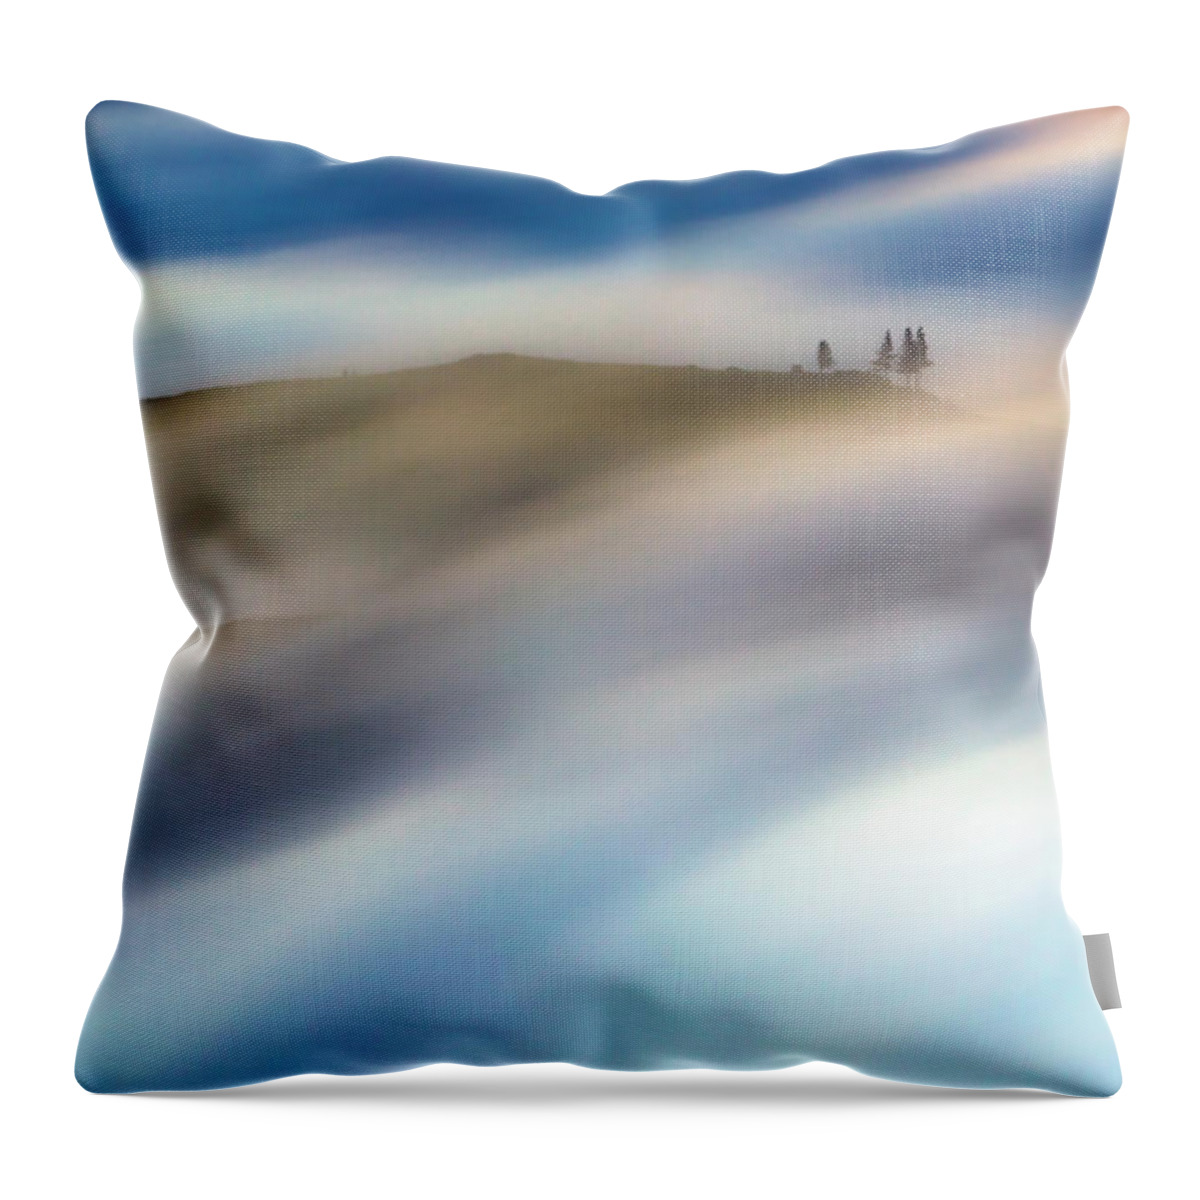 Atlantic Ocean Throw Pillow featuring the photograph Touch Of Wind by Evgeni Dinev